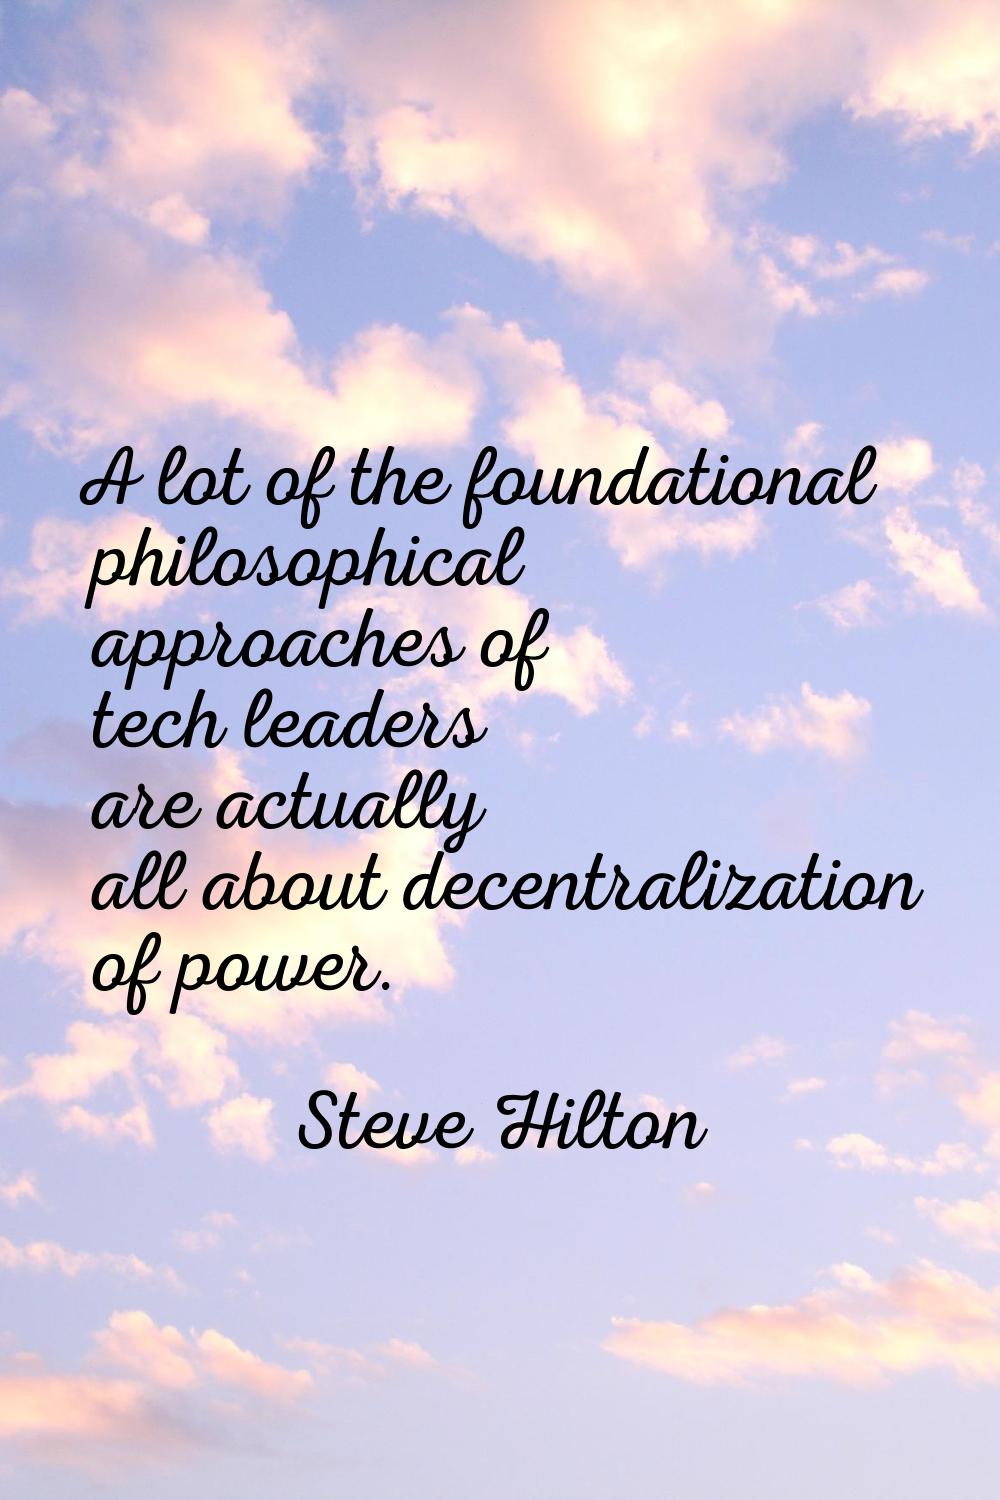 A lot of the foundational philosophical approaches of tech leaders are actually all about decentral